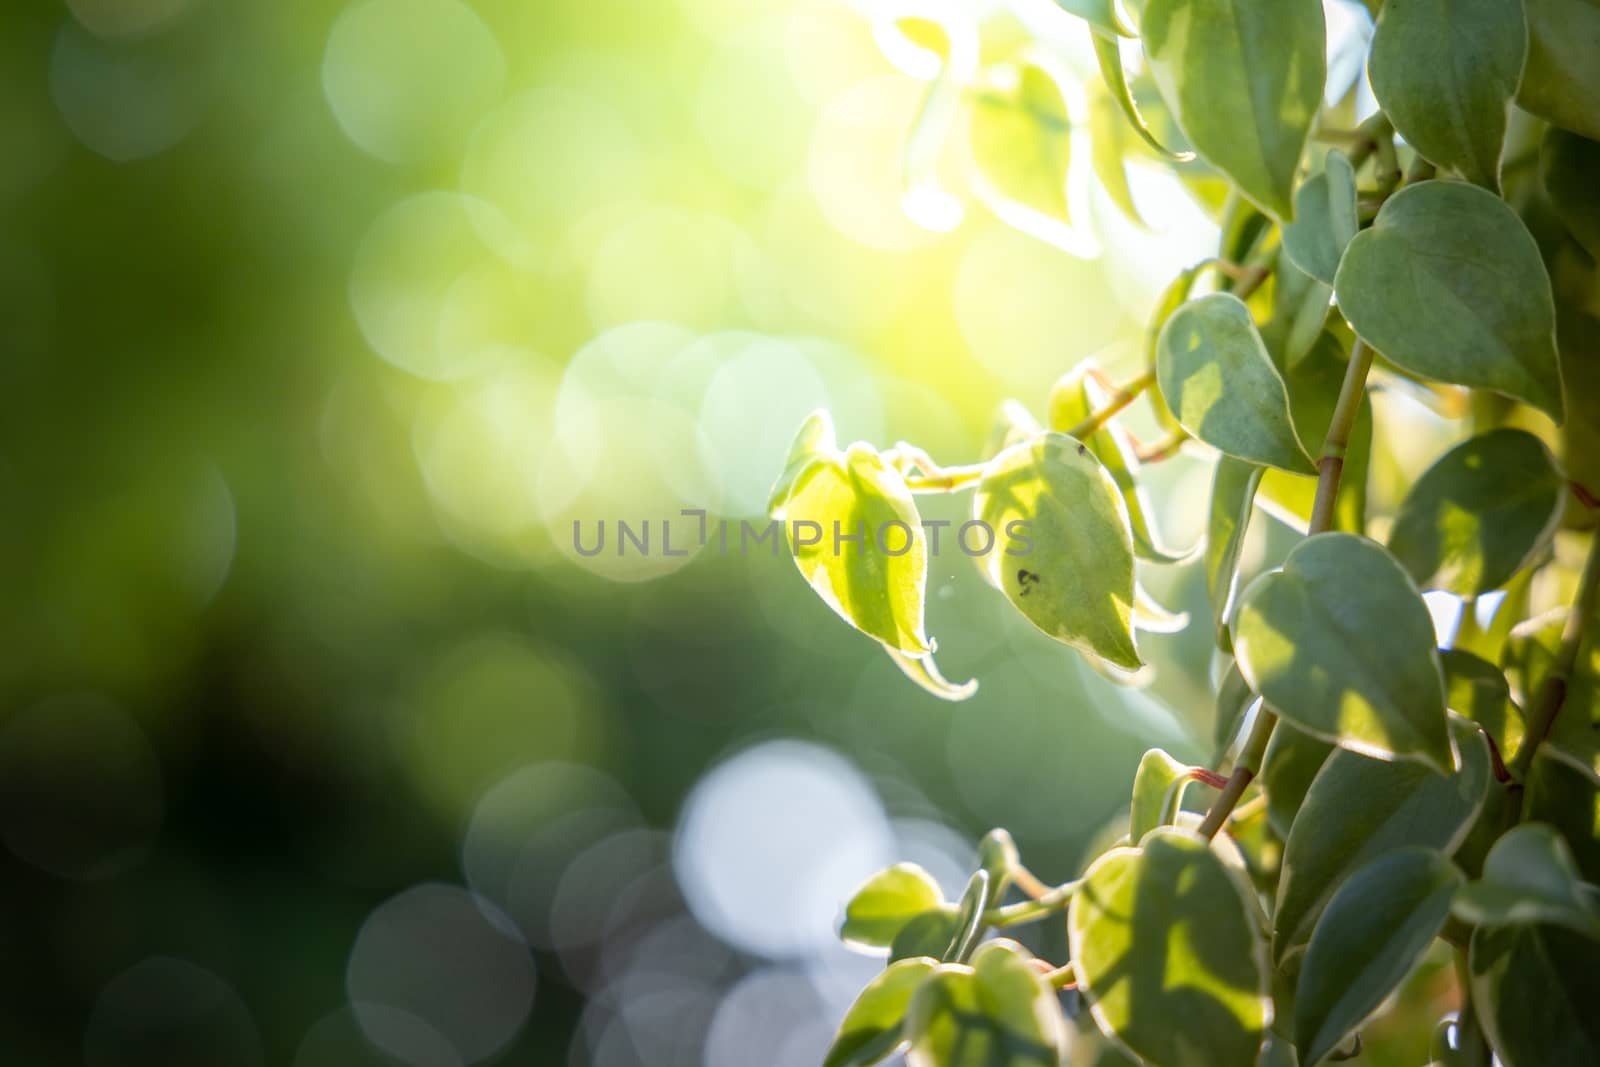 Close Up green leaf under sunlight in the garden. Natural backgr by teerawit